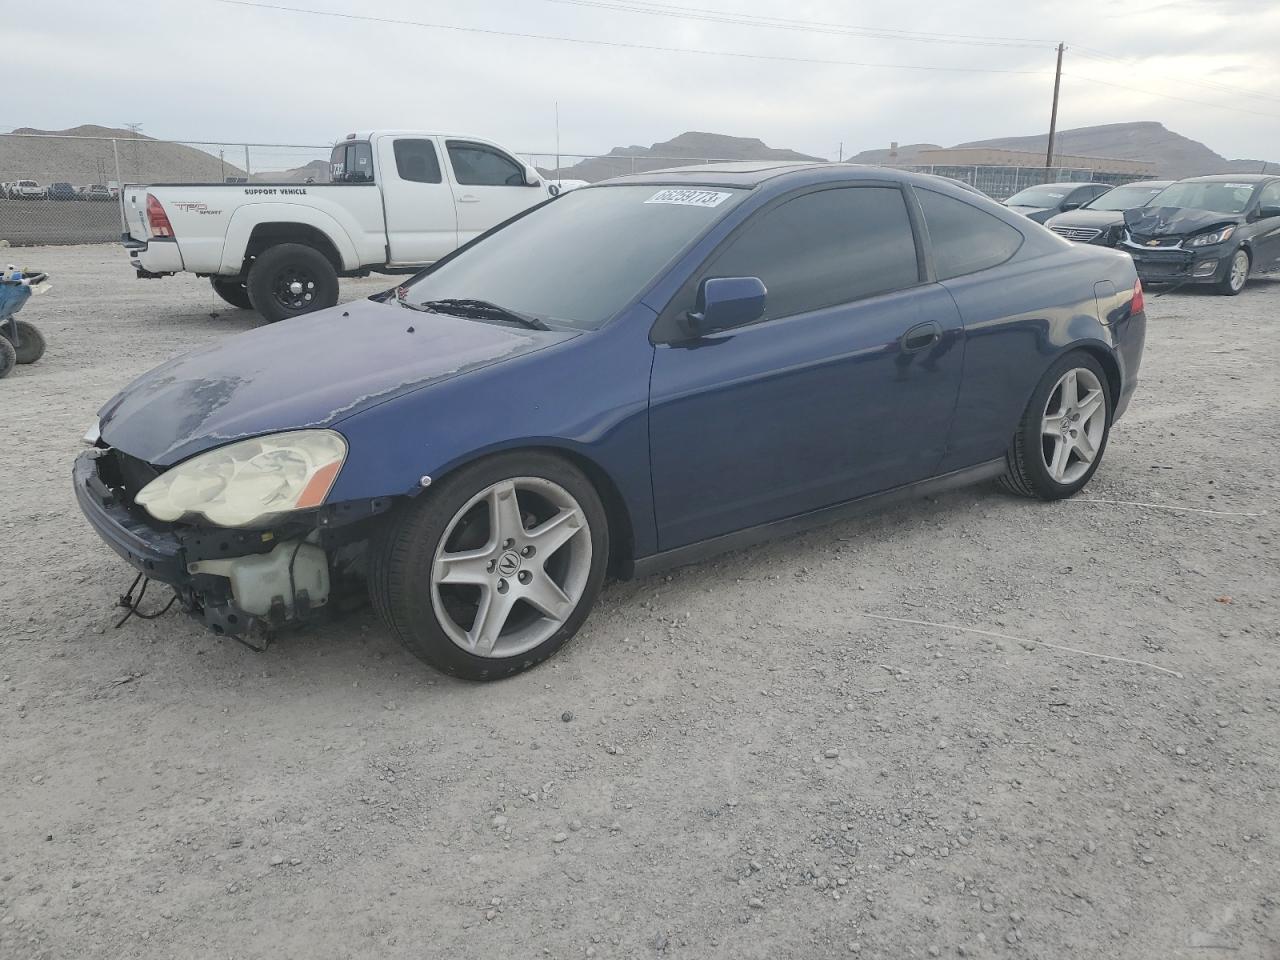 VIN: JH4DC54834S004025 - acura rsx